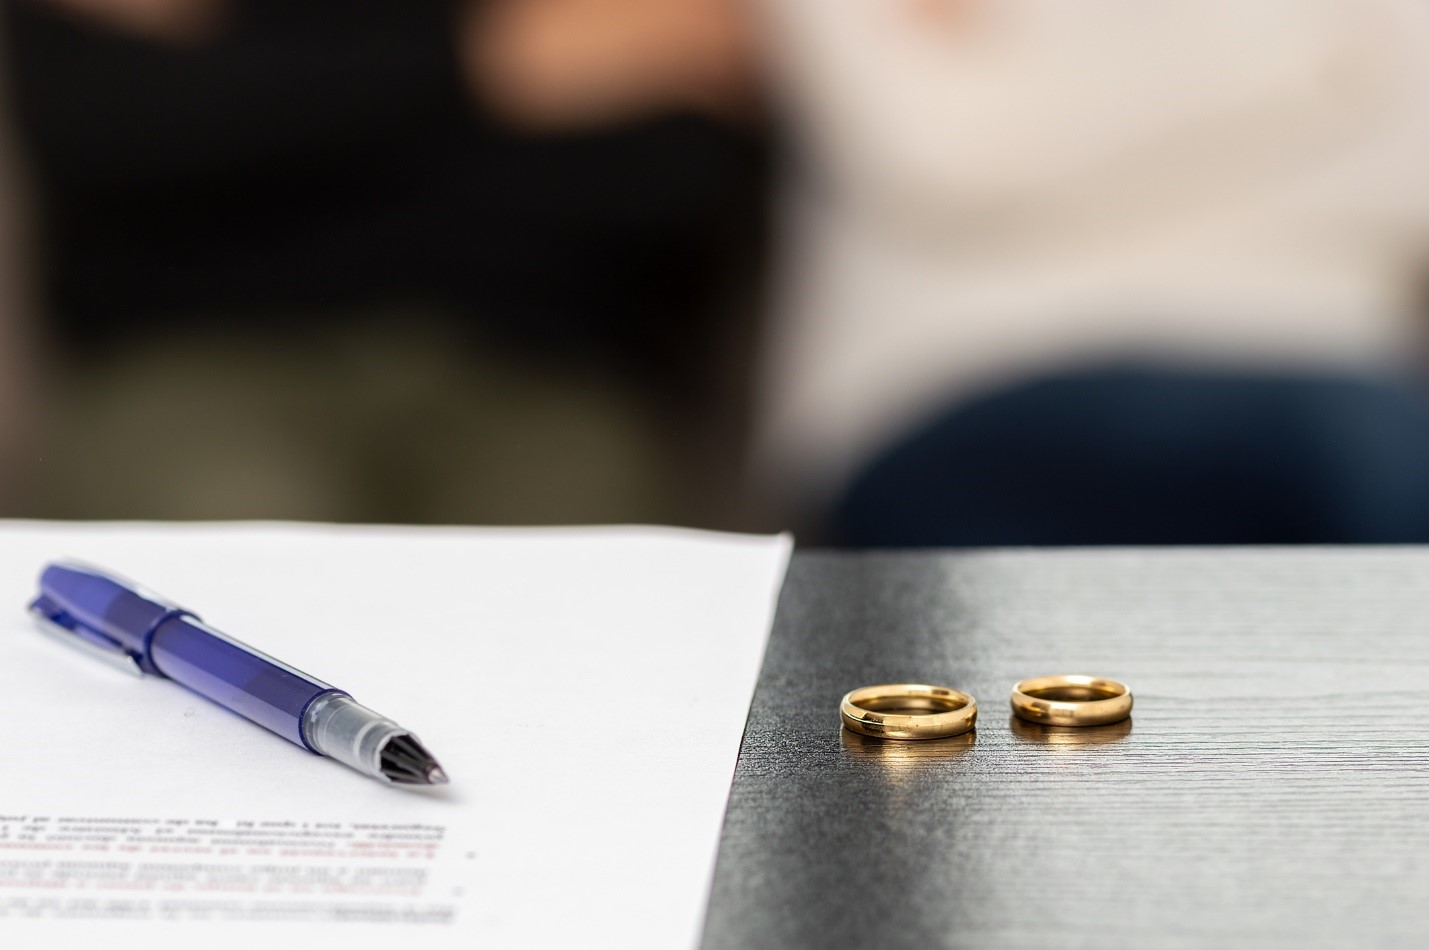 Two wedding bands on a table next to divorce papers and a pen